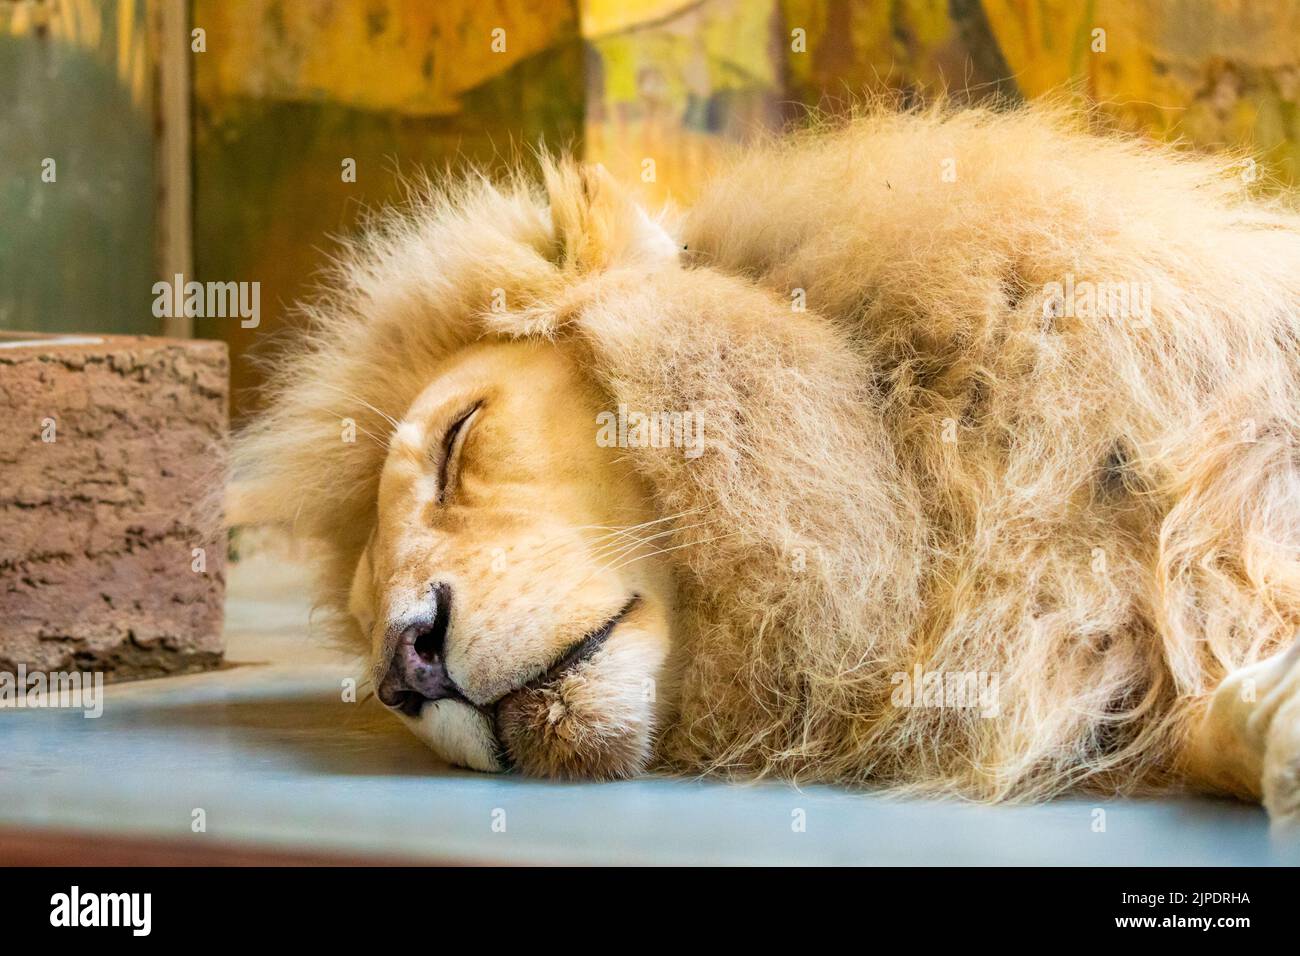 The lion (latin name Panthera leo krugeri) is resting on the wooden desk. Detail of animal head with beautiful eyes. Lion is naturally living in south Stock Photo